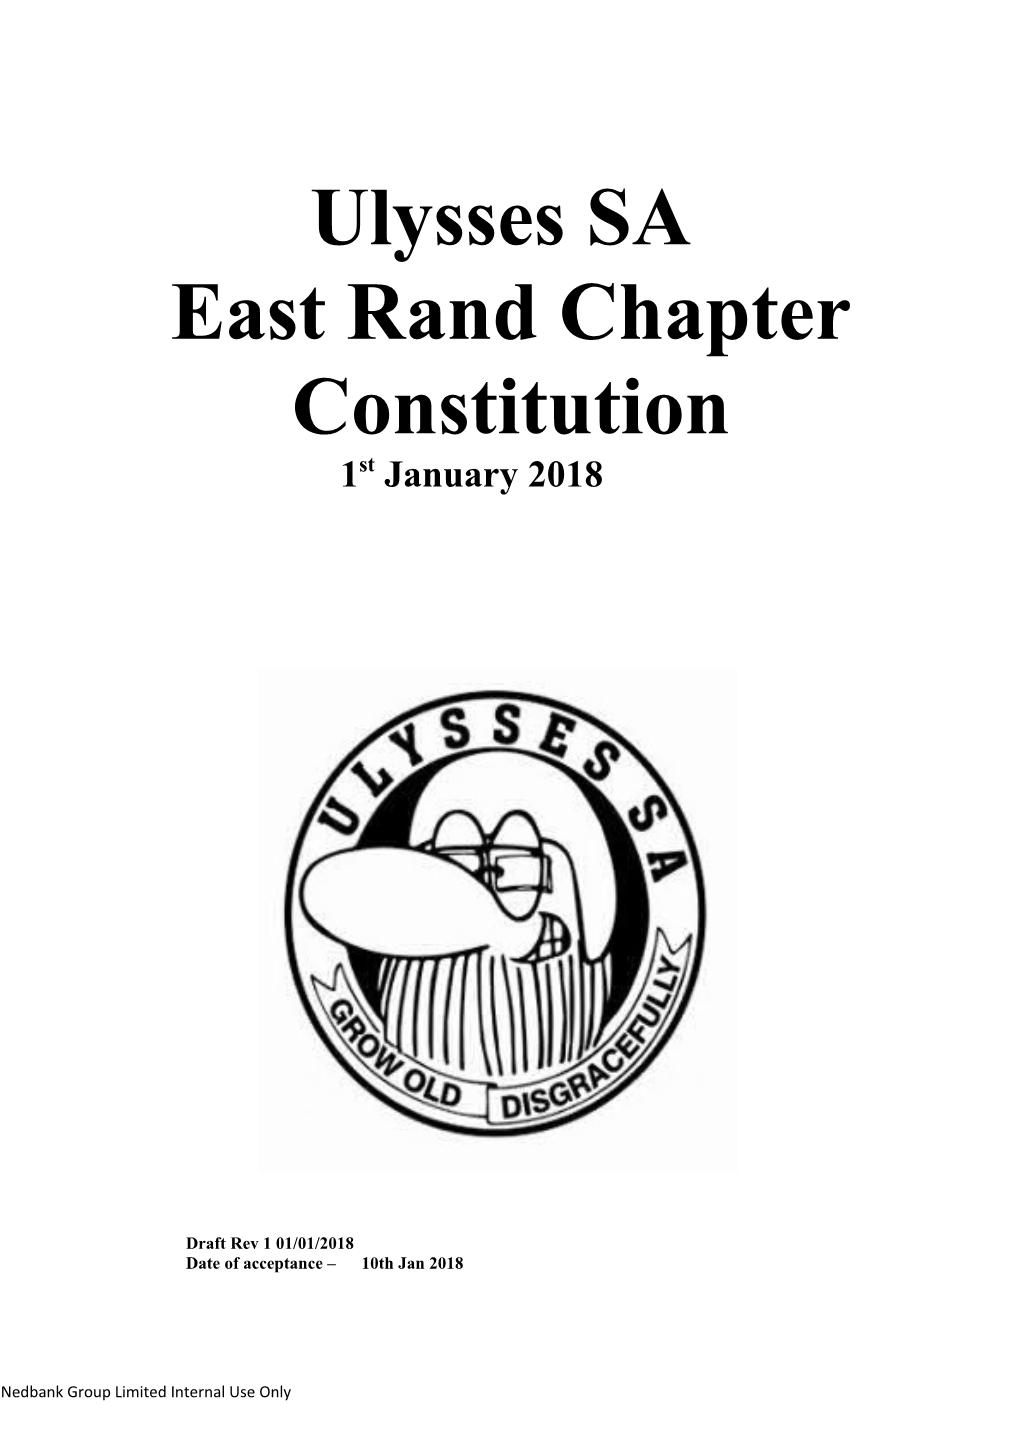 East Rand Chapter Constitution